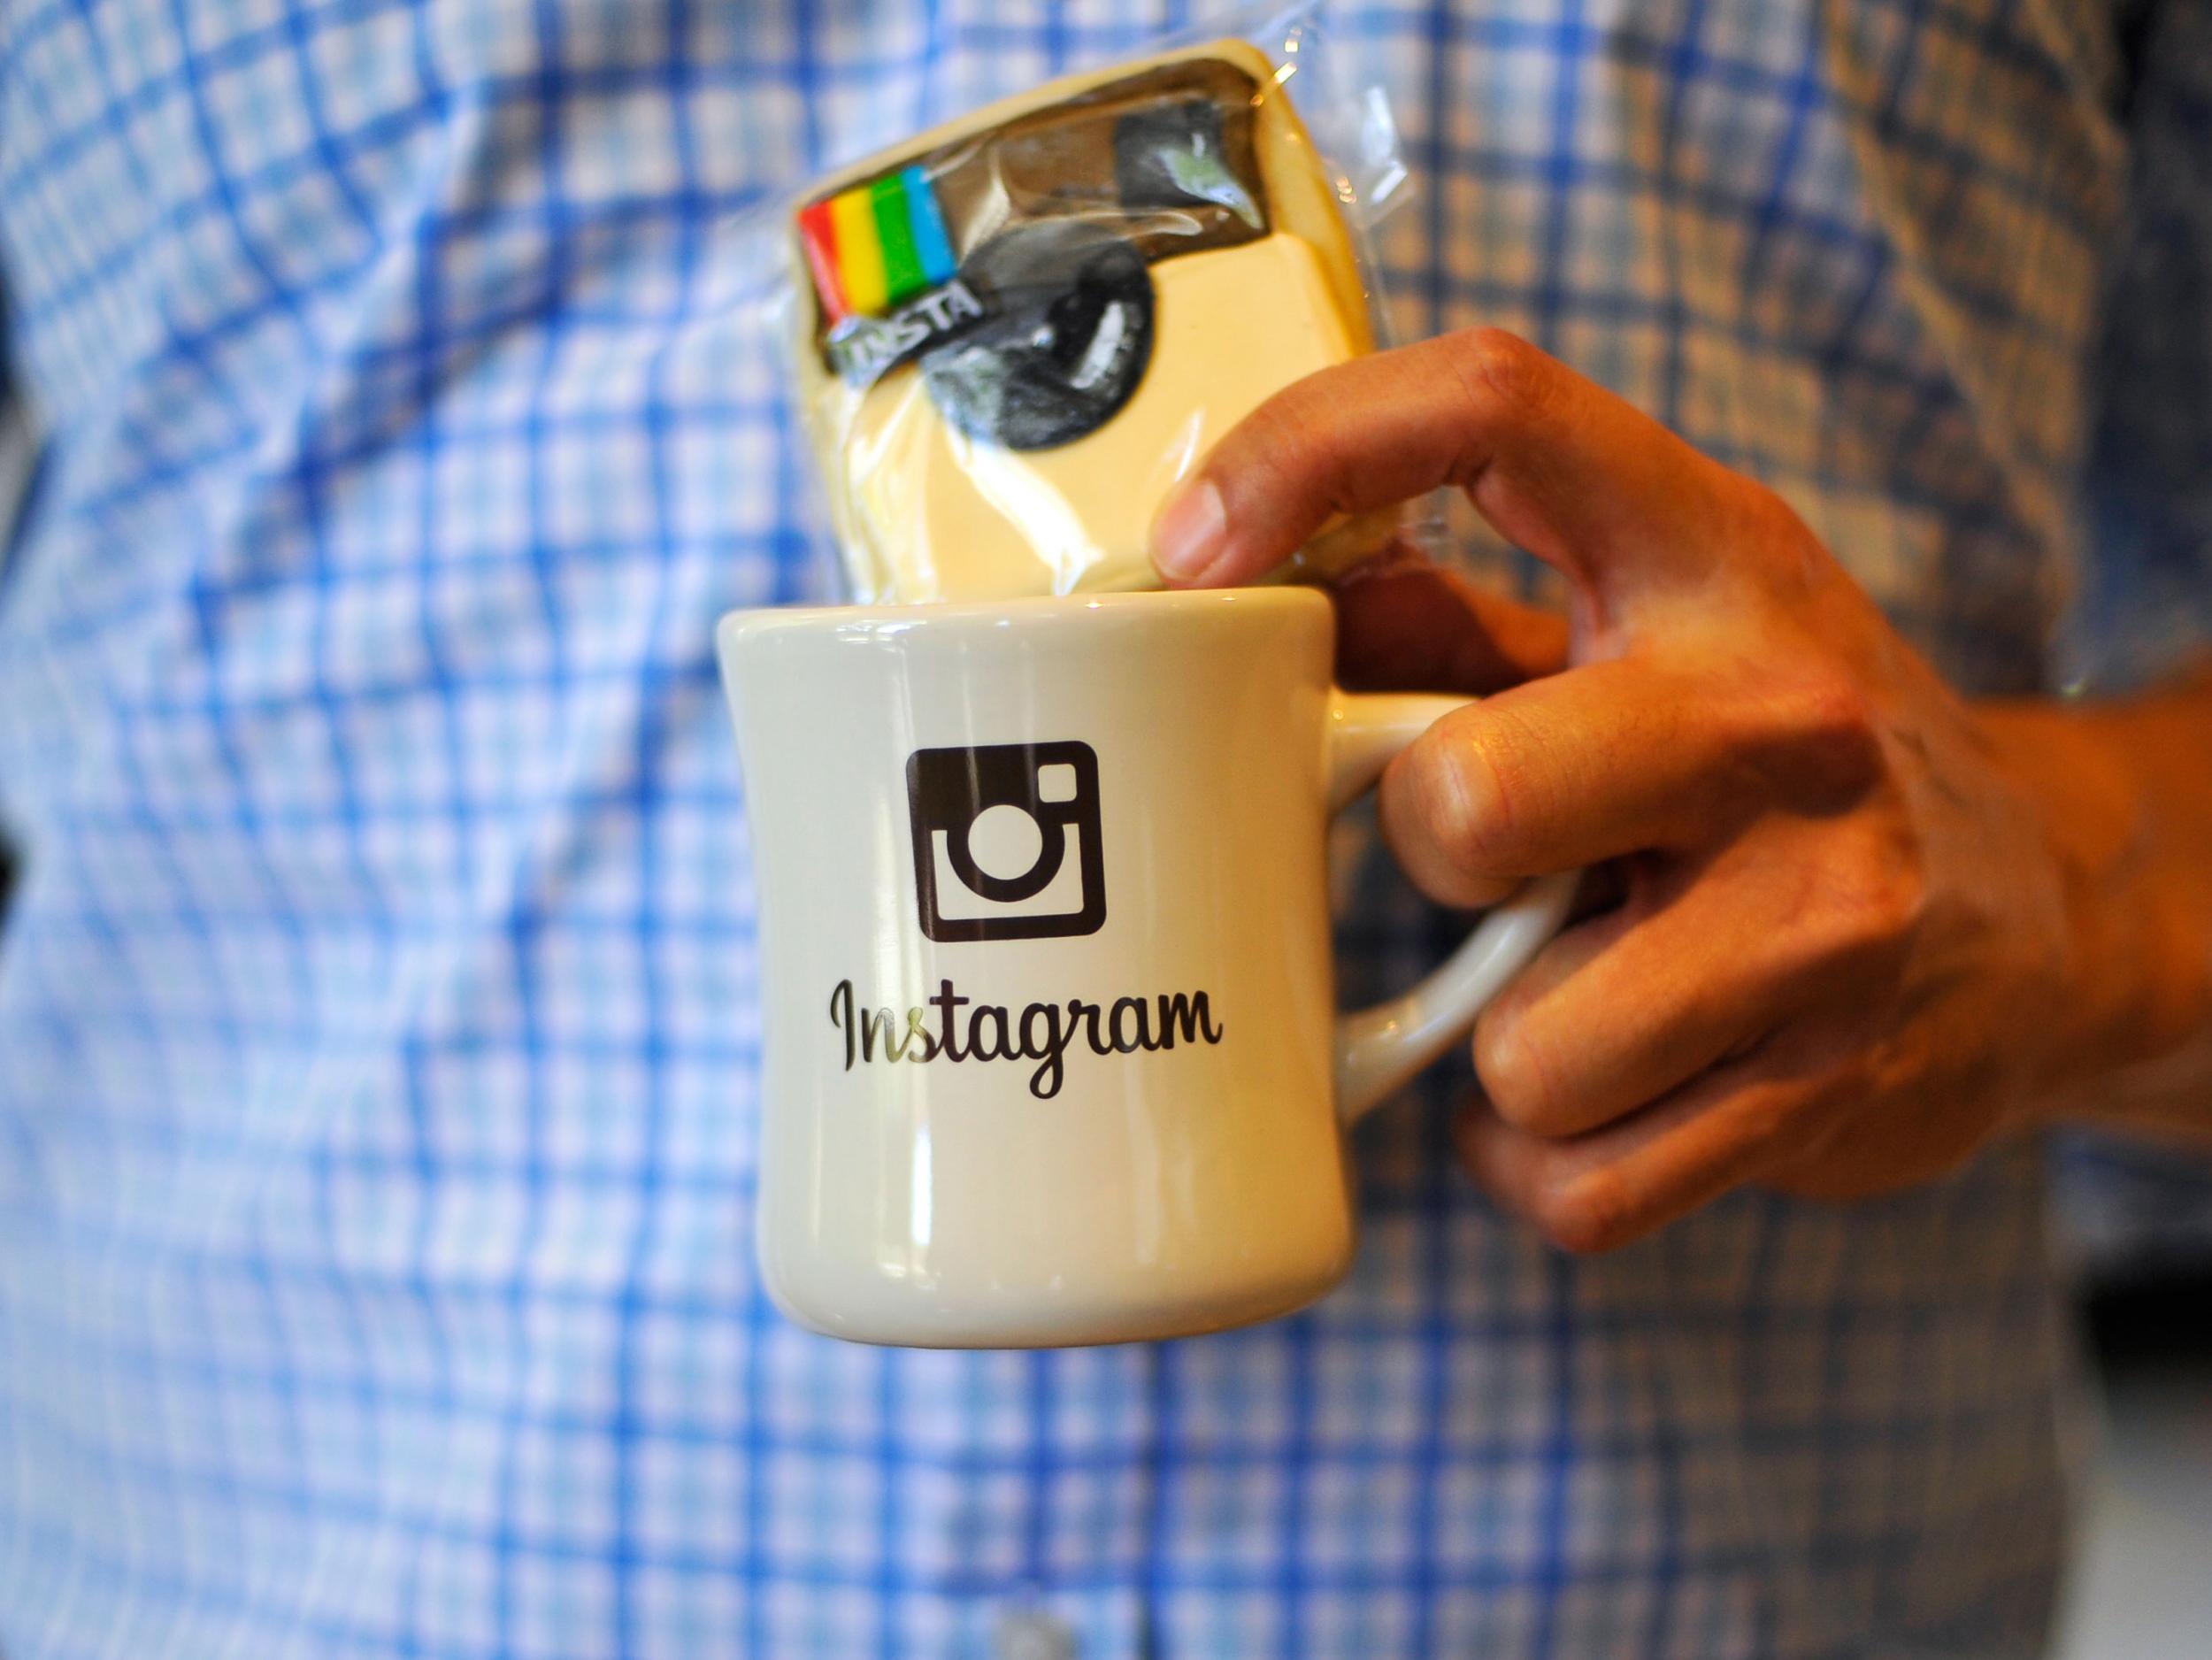 The account switching feature has been warmly received by Instagram's users